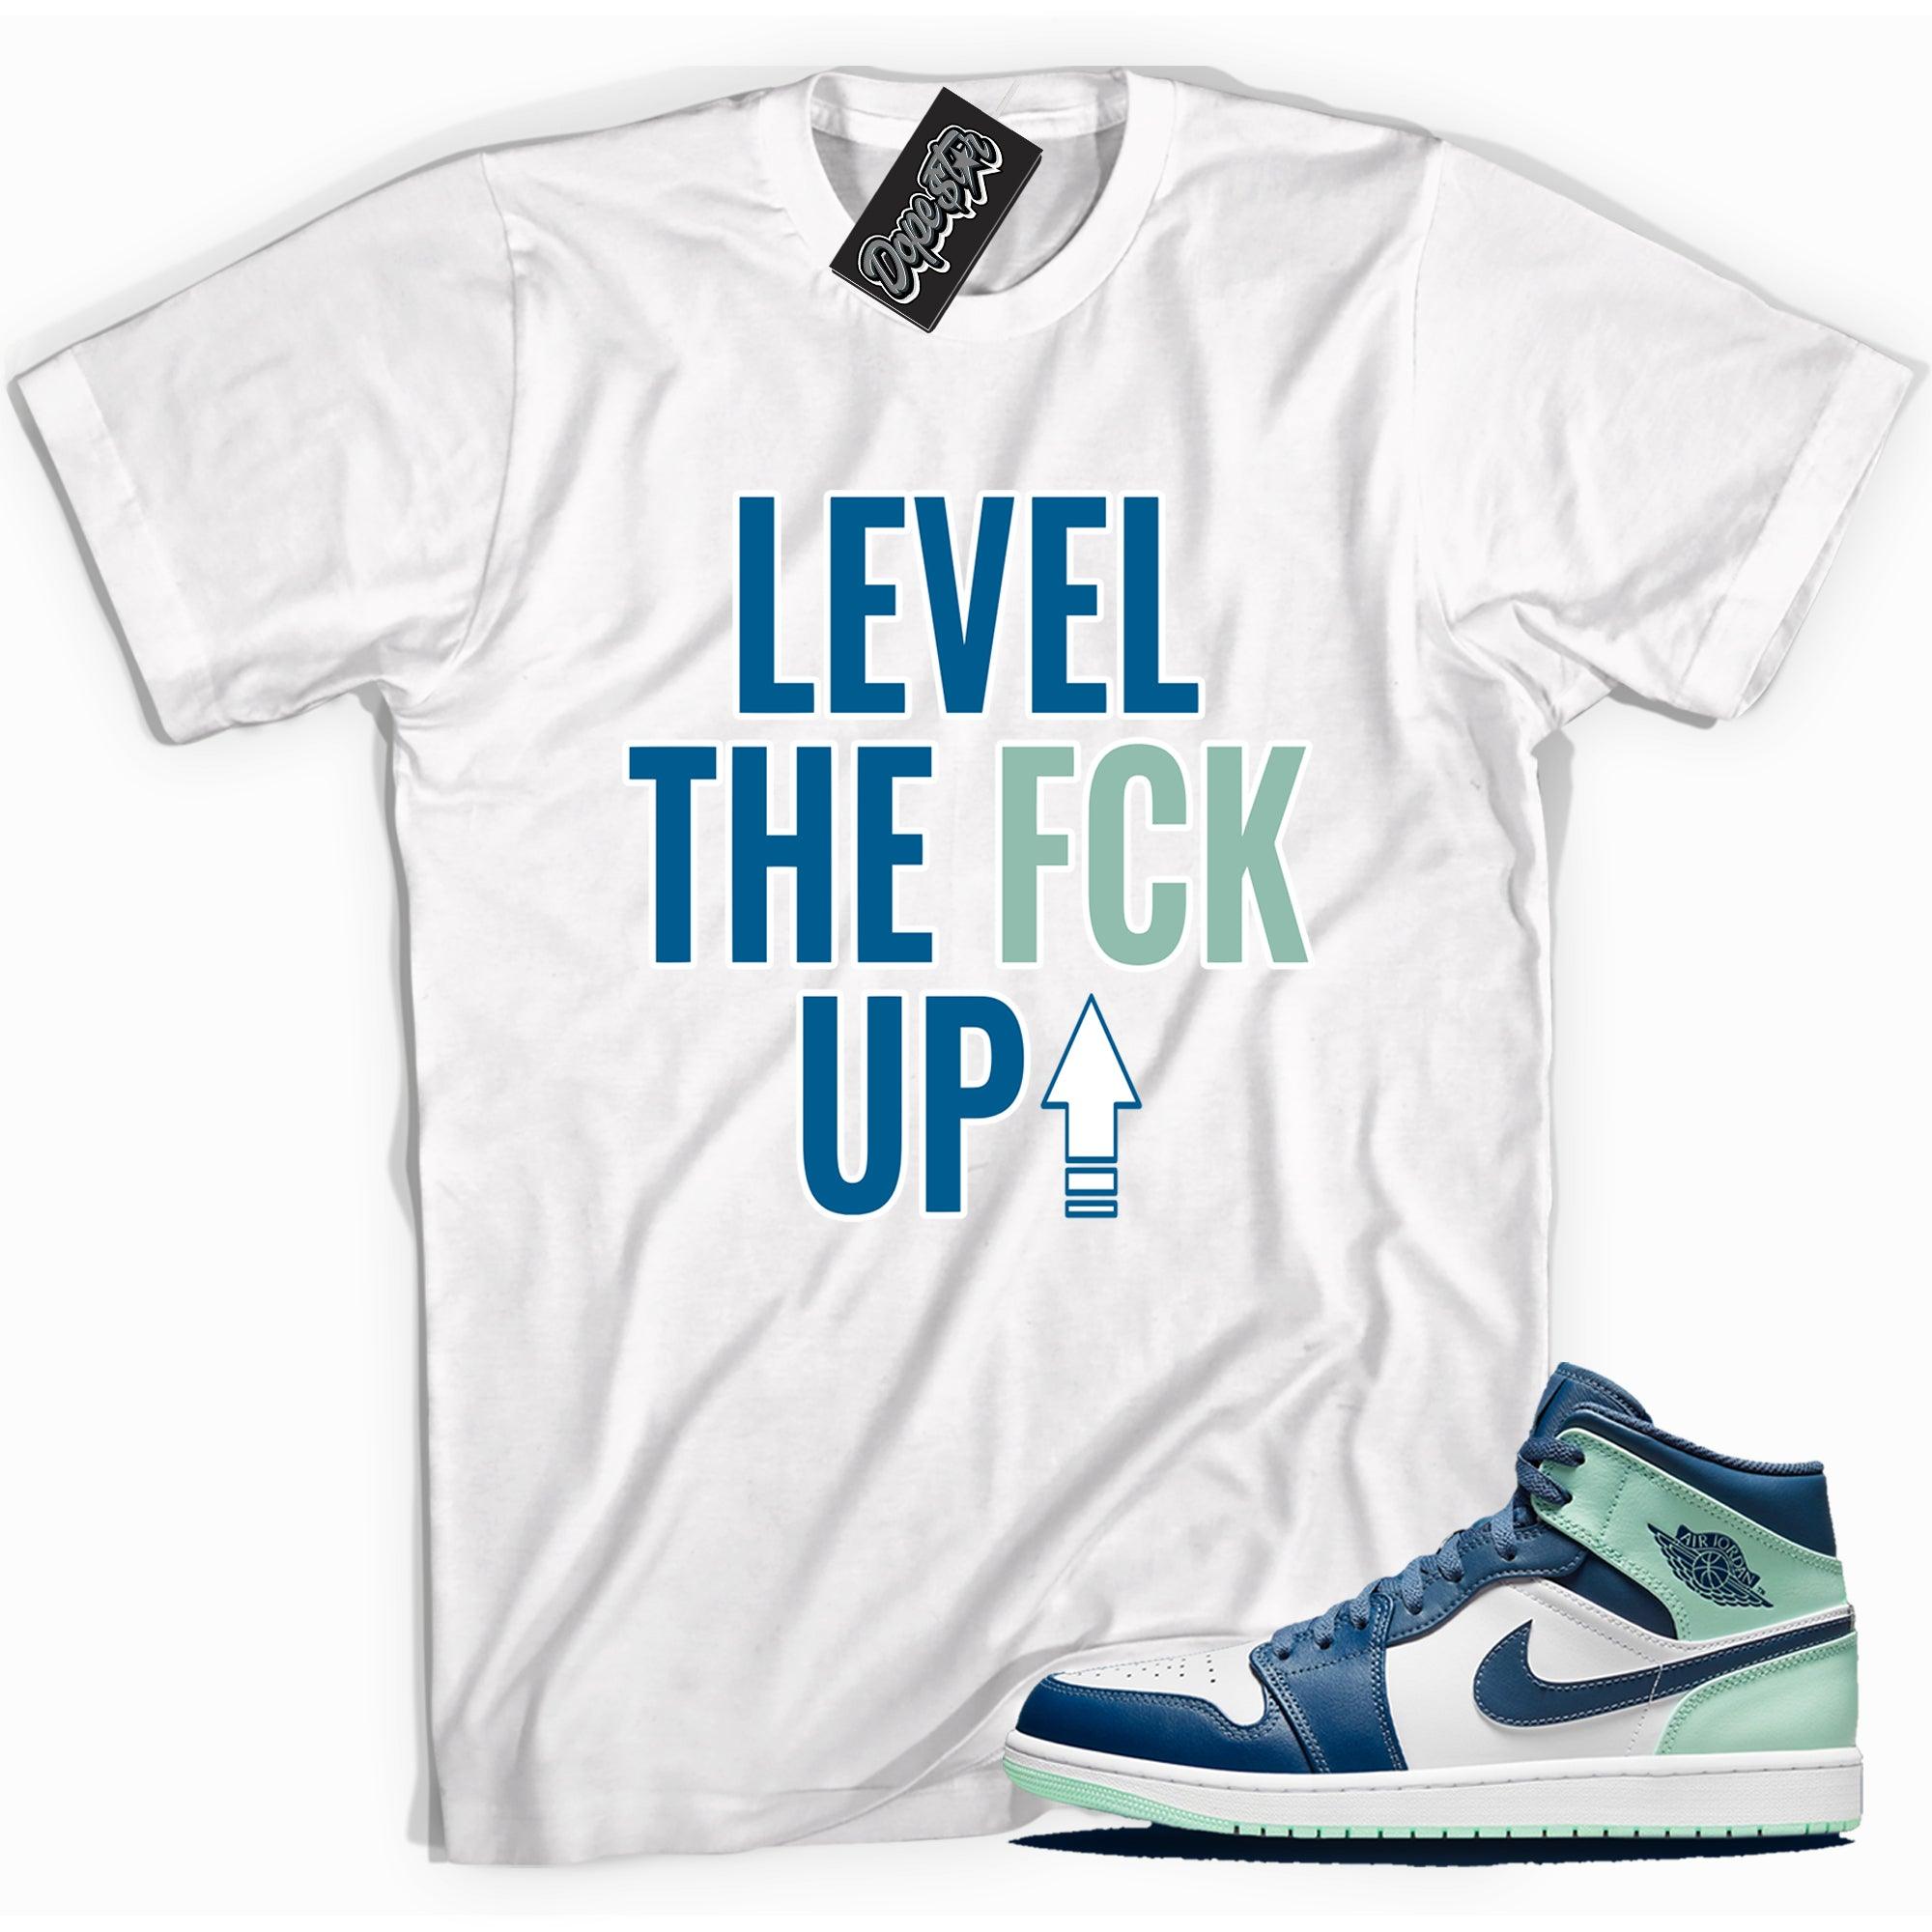 Cool white graphic tee with 'Level Up' print, that perfectly matches Air Jordan 1 Mid Mystic Navy Mint Foam sneakers.